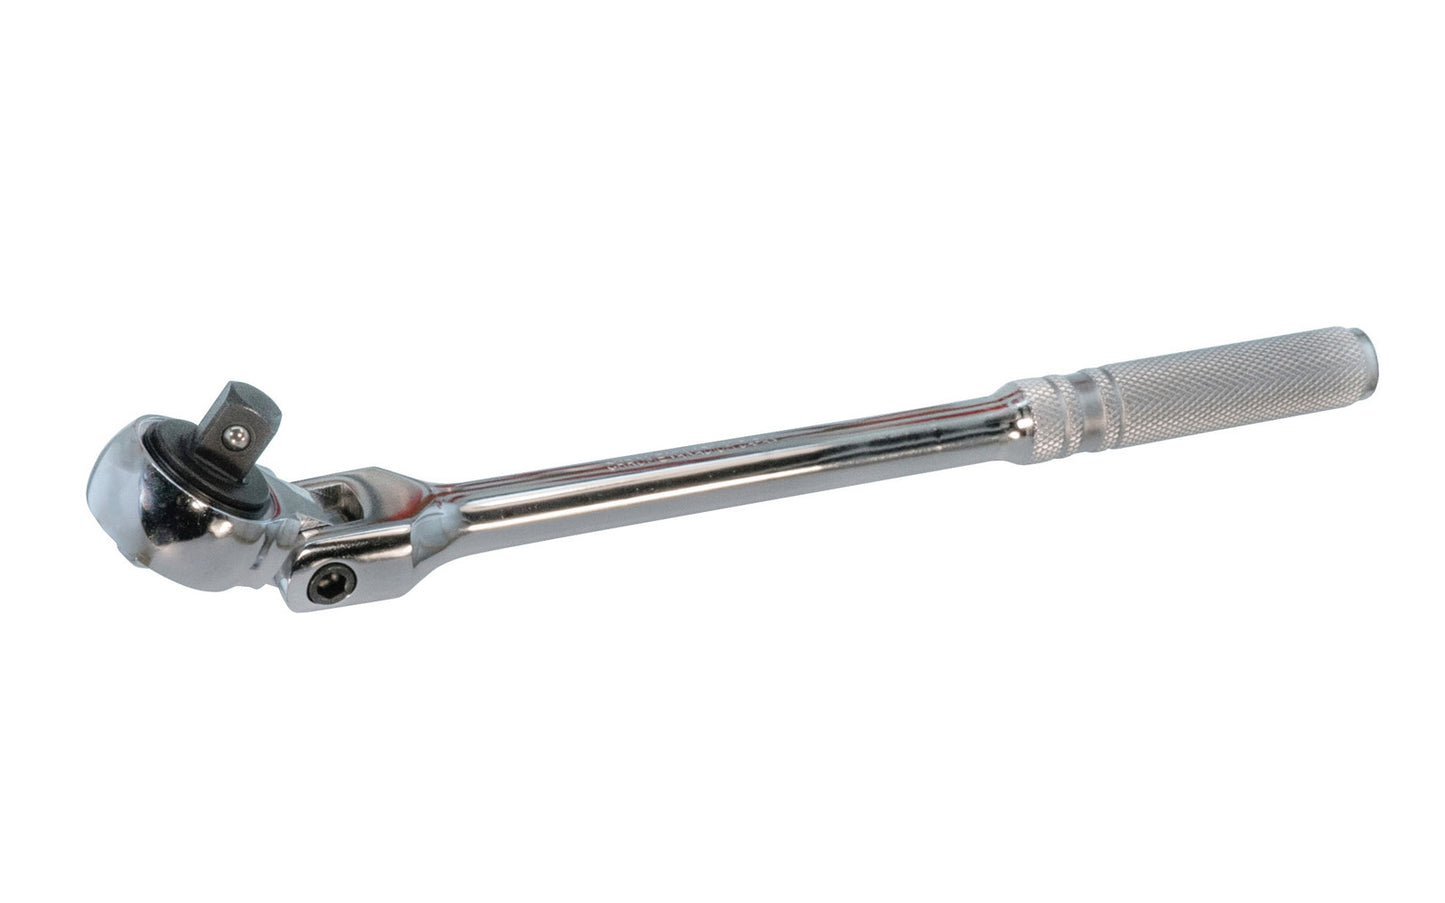 This 13" Ratchet Handle 1/2" Dr with Flex Head is made of Chrome Vanadium Steel with an etched steel handle for a good grip. Easy change reversible ratchet direction. 13" overall length. 1/2" drive. Flexible head. Japanese Ratchet Handle.   Made in Japan.